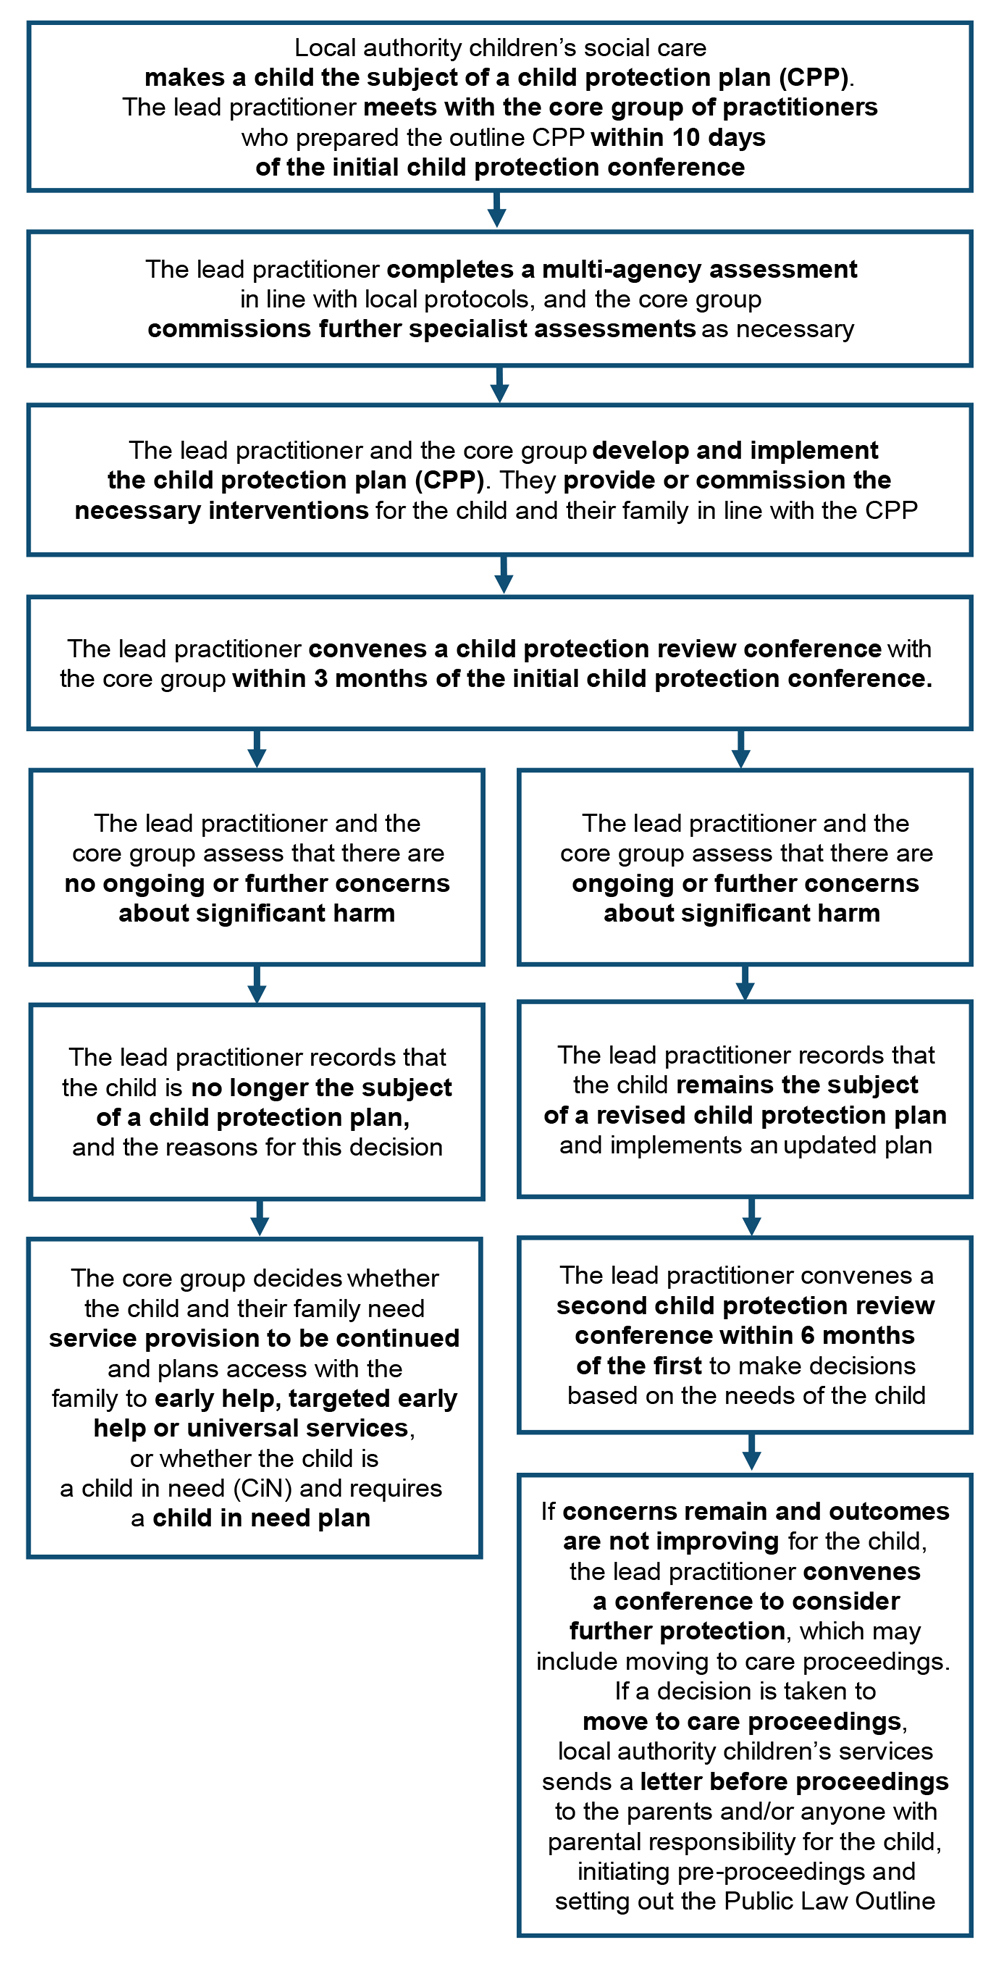 4.6 Flowchart 6: What happens after the child protection conference, including review?